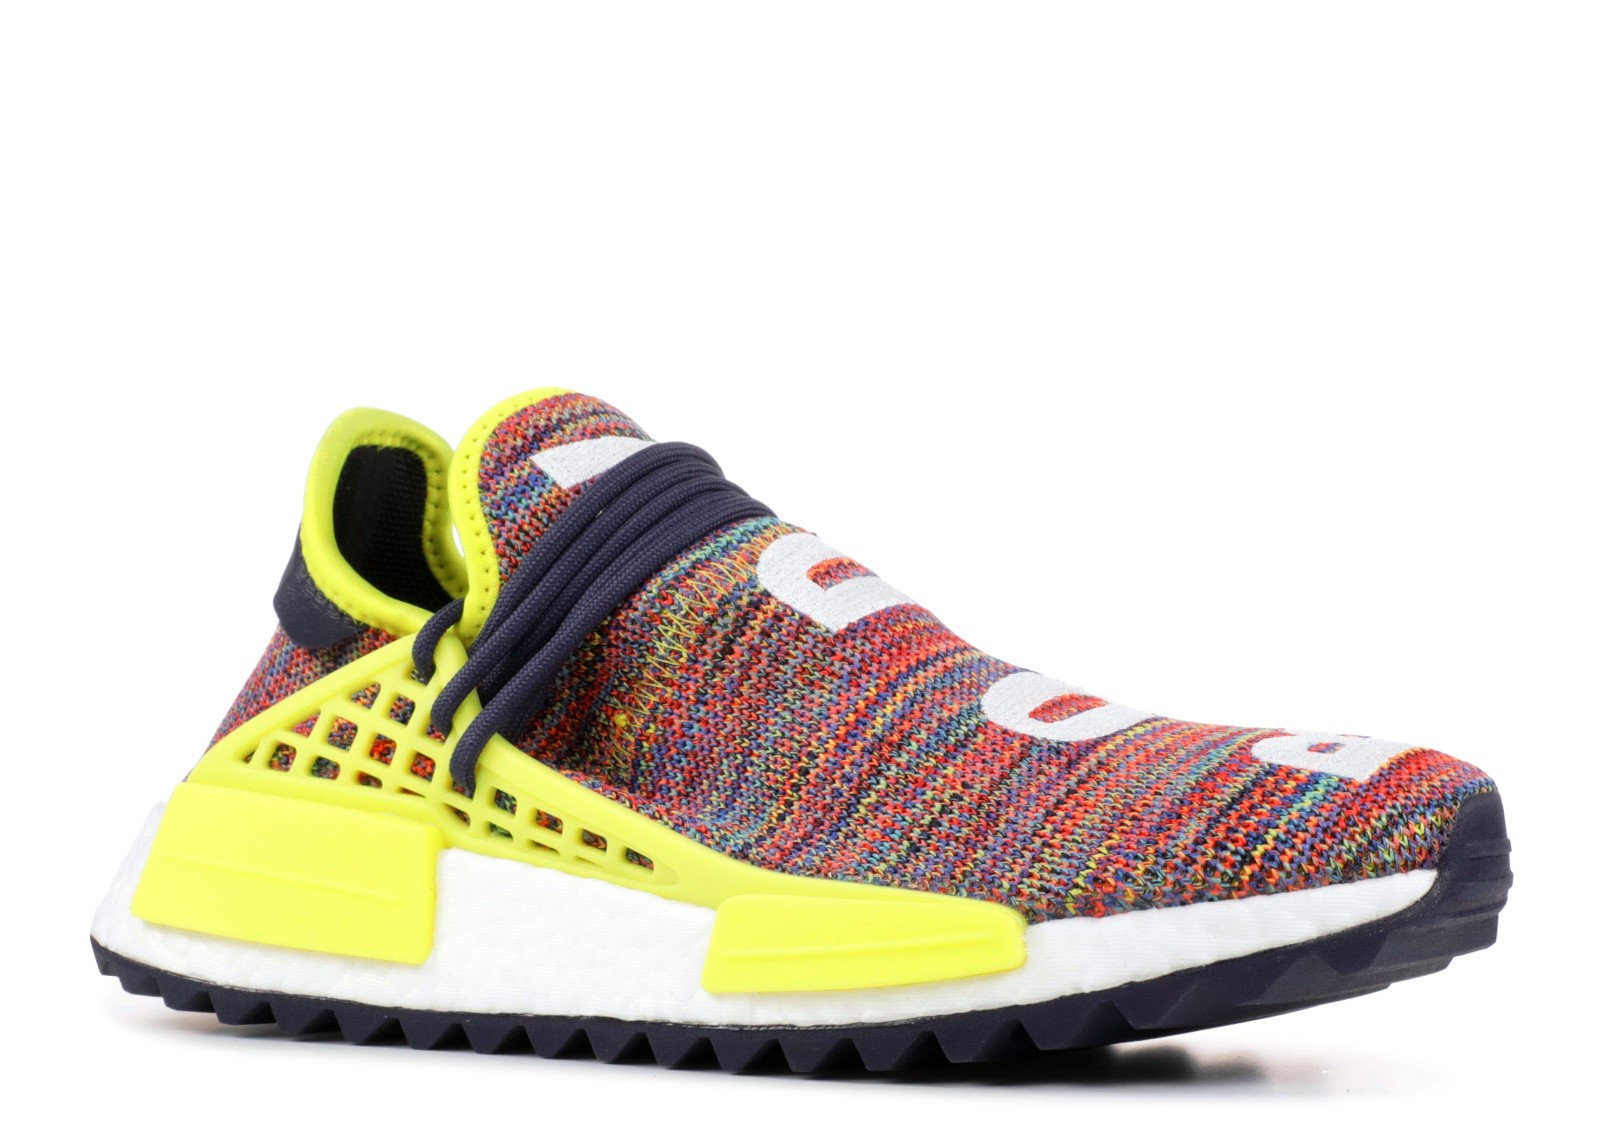 PW HUMAN RACE NMD TR "MULTI-COLOR" image 2